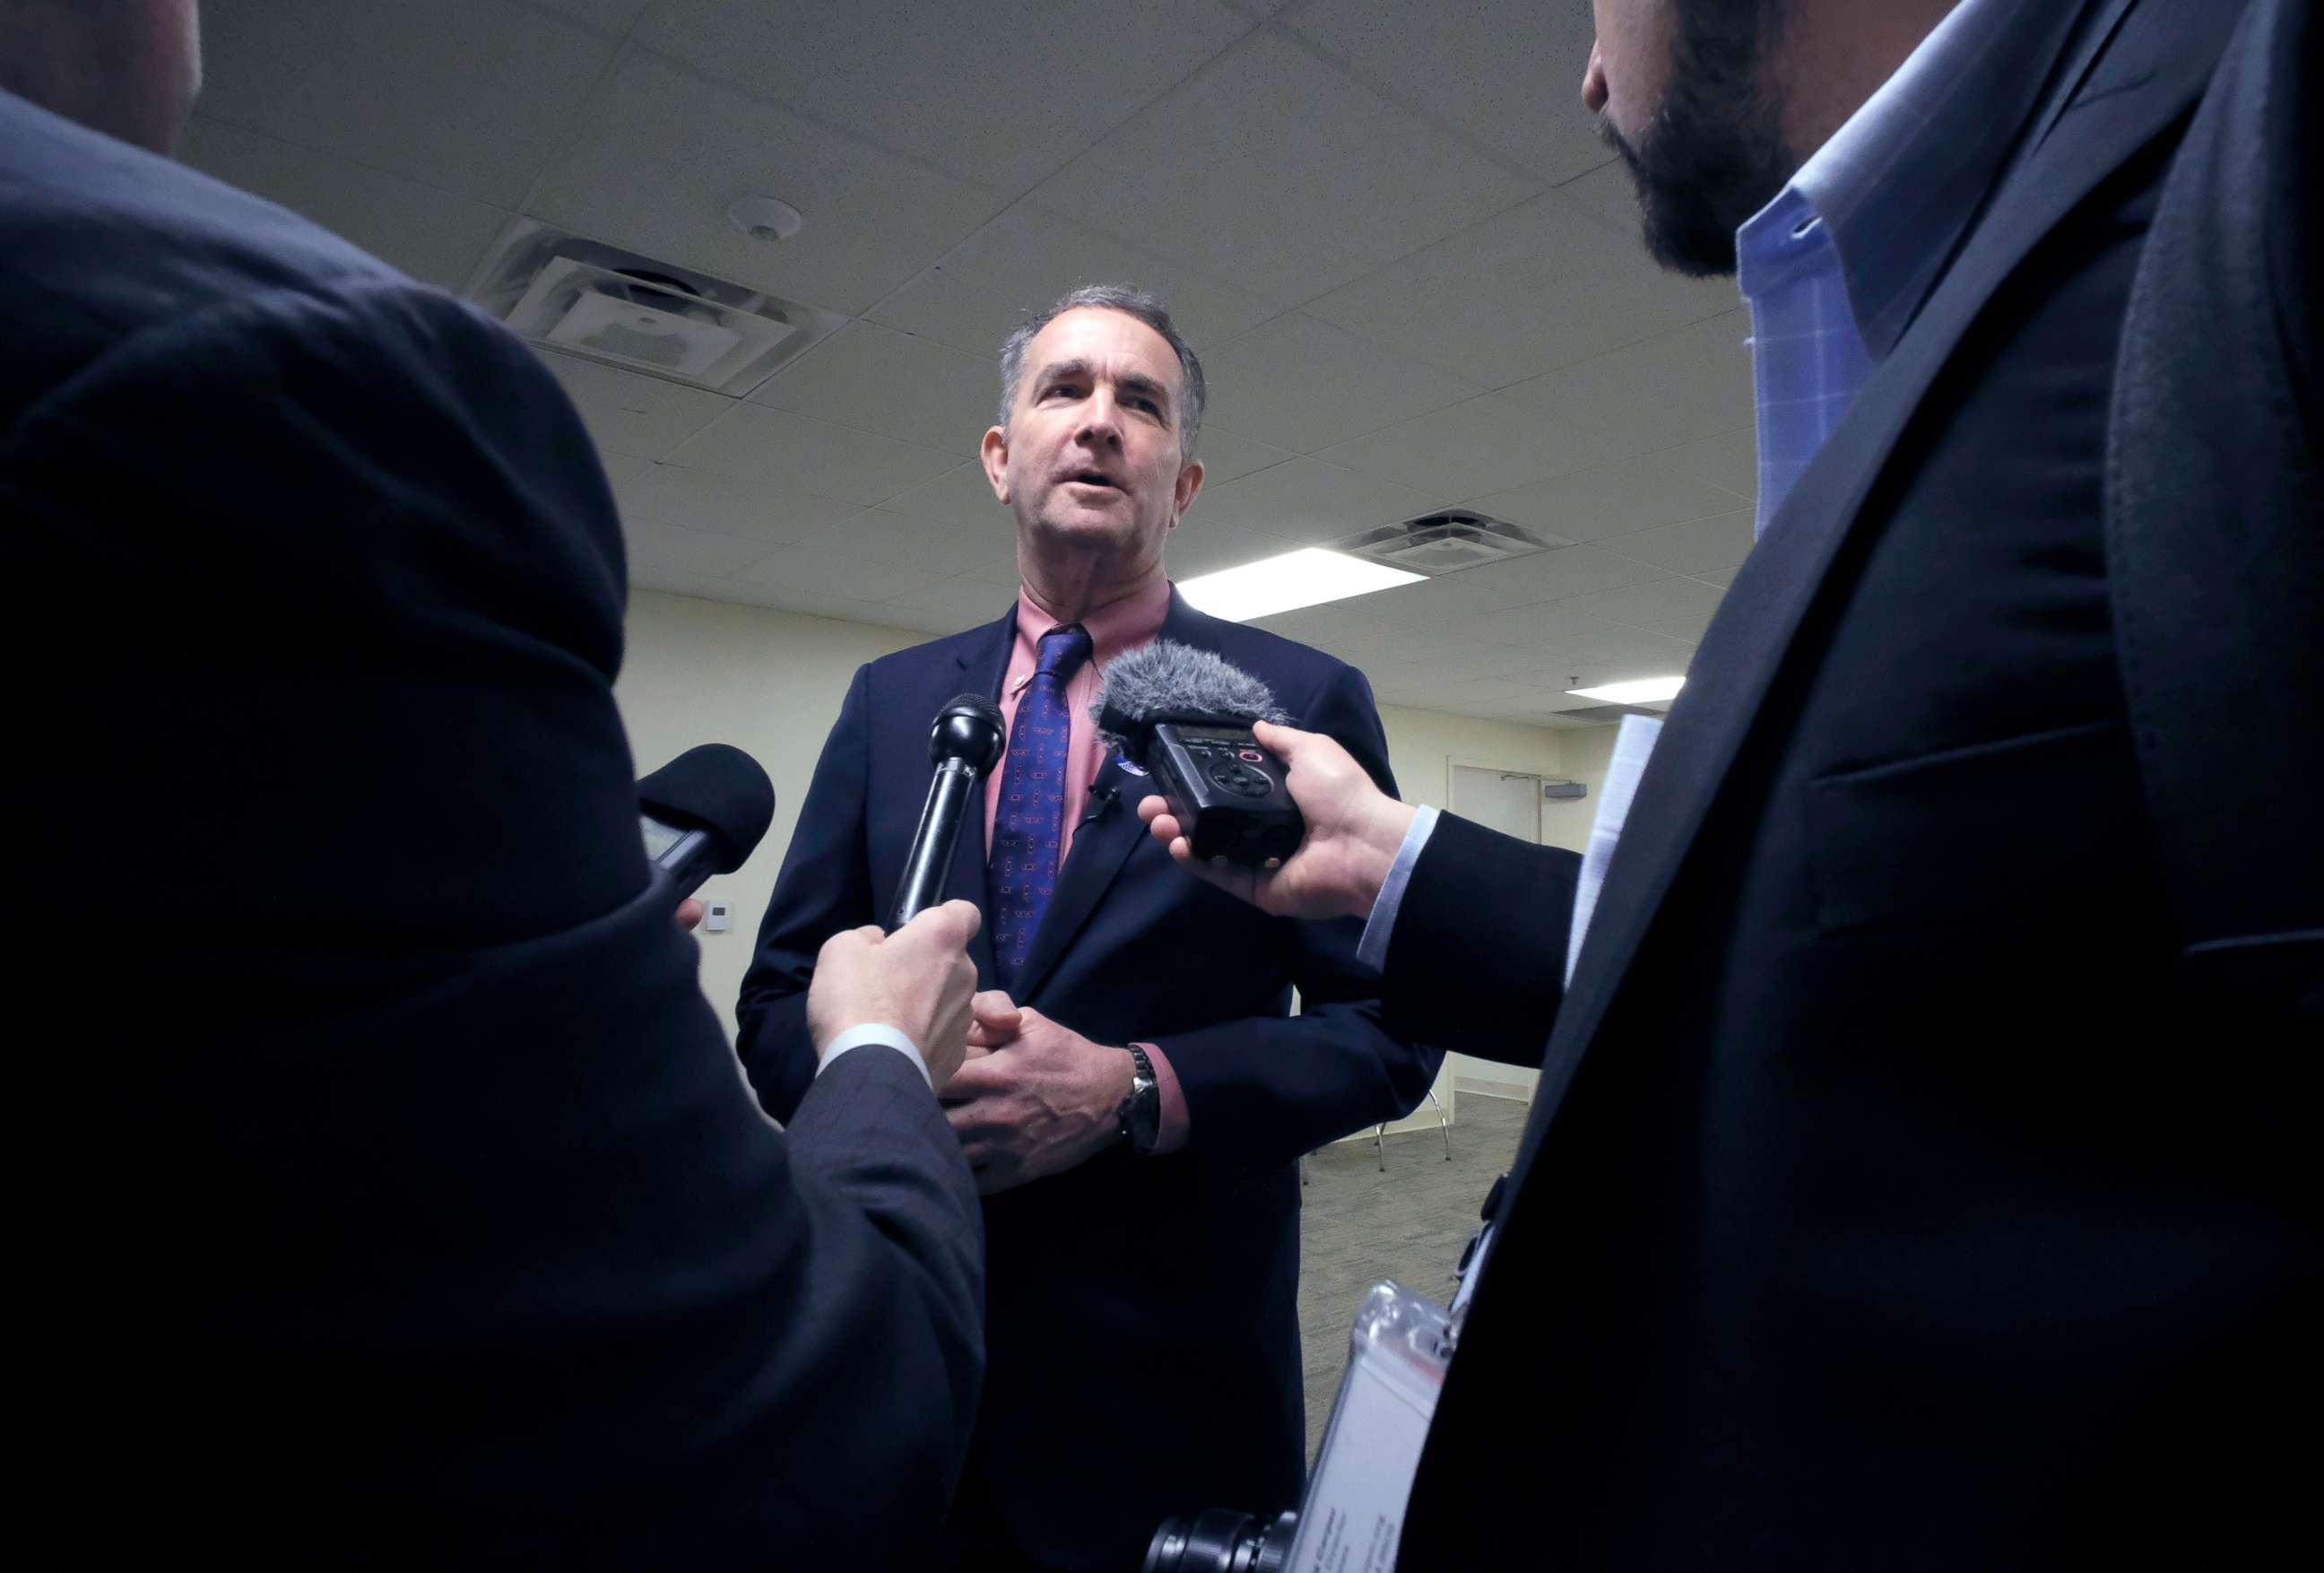 PHOTO: Virginia Governor Ralph Northam speaks with members of the media after a meeting inside the Pocahontas Building in Richmond, Va., March 3, 2020.